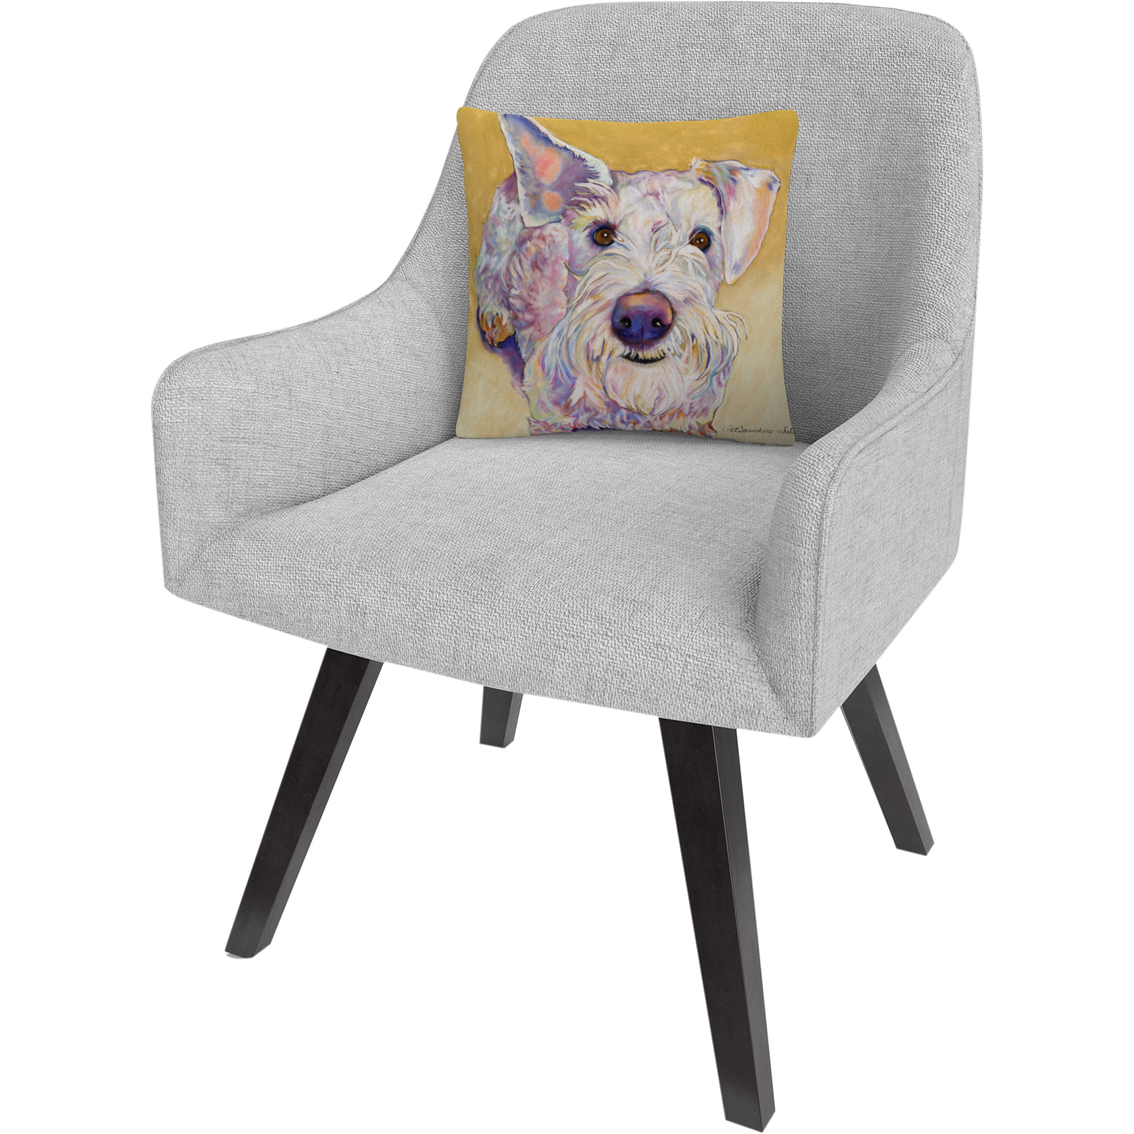 Trademark Fine Art Scooter Animals Pets Painting Bold Decorative Throw Pillow - Image 2 of 2